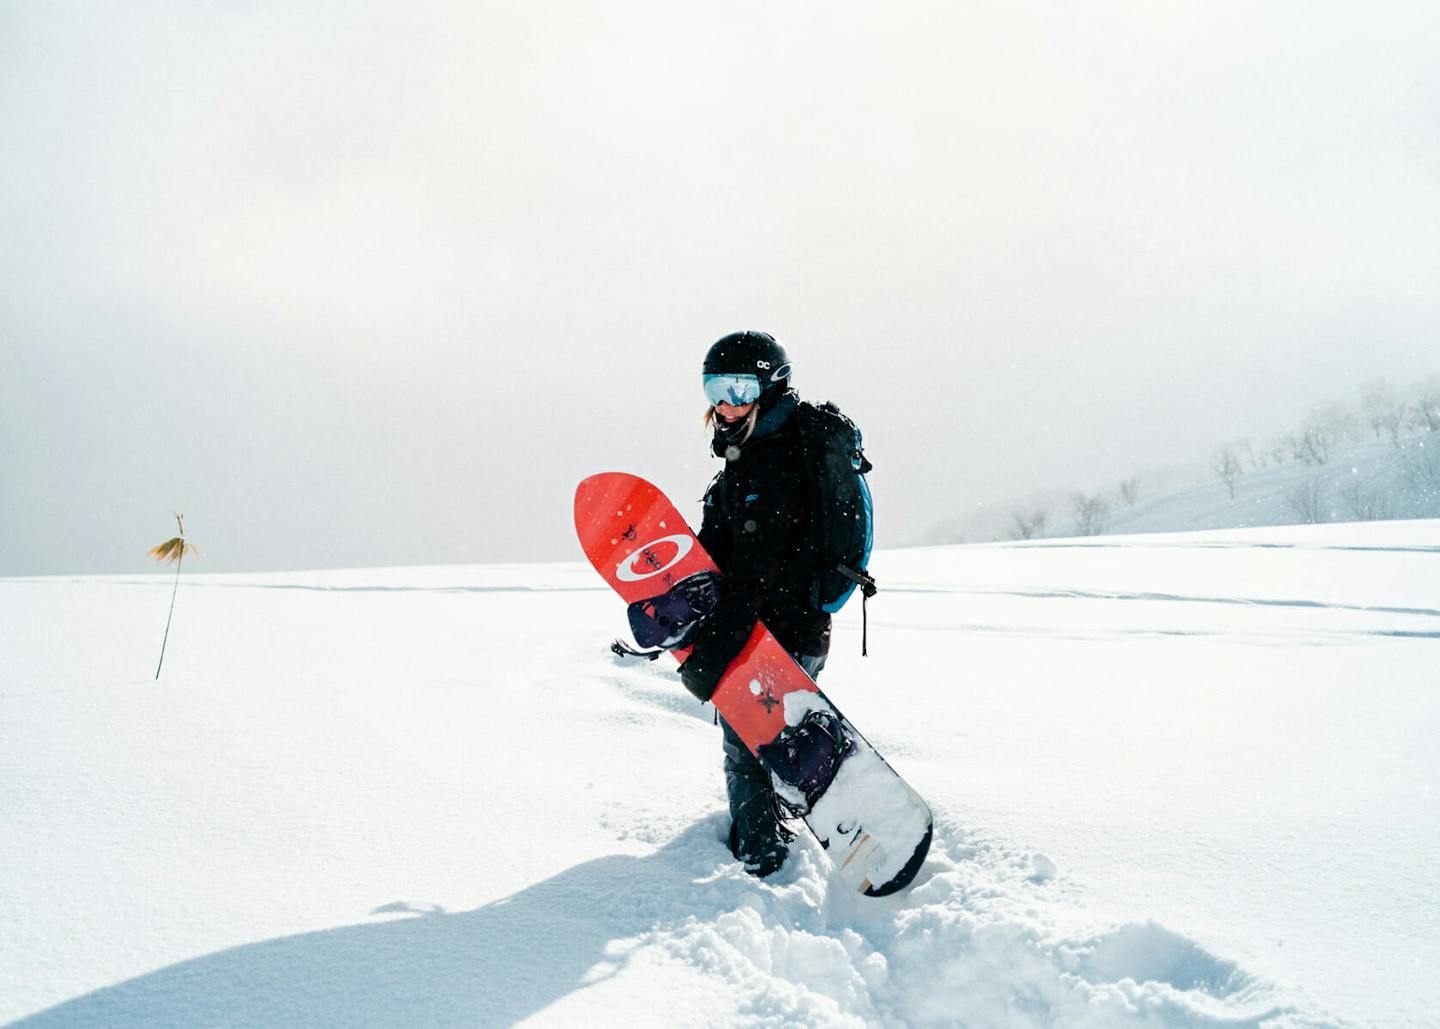 Young snowboarder sliding down snowy slope on mountain at winter